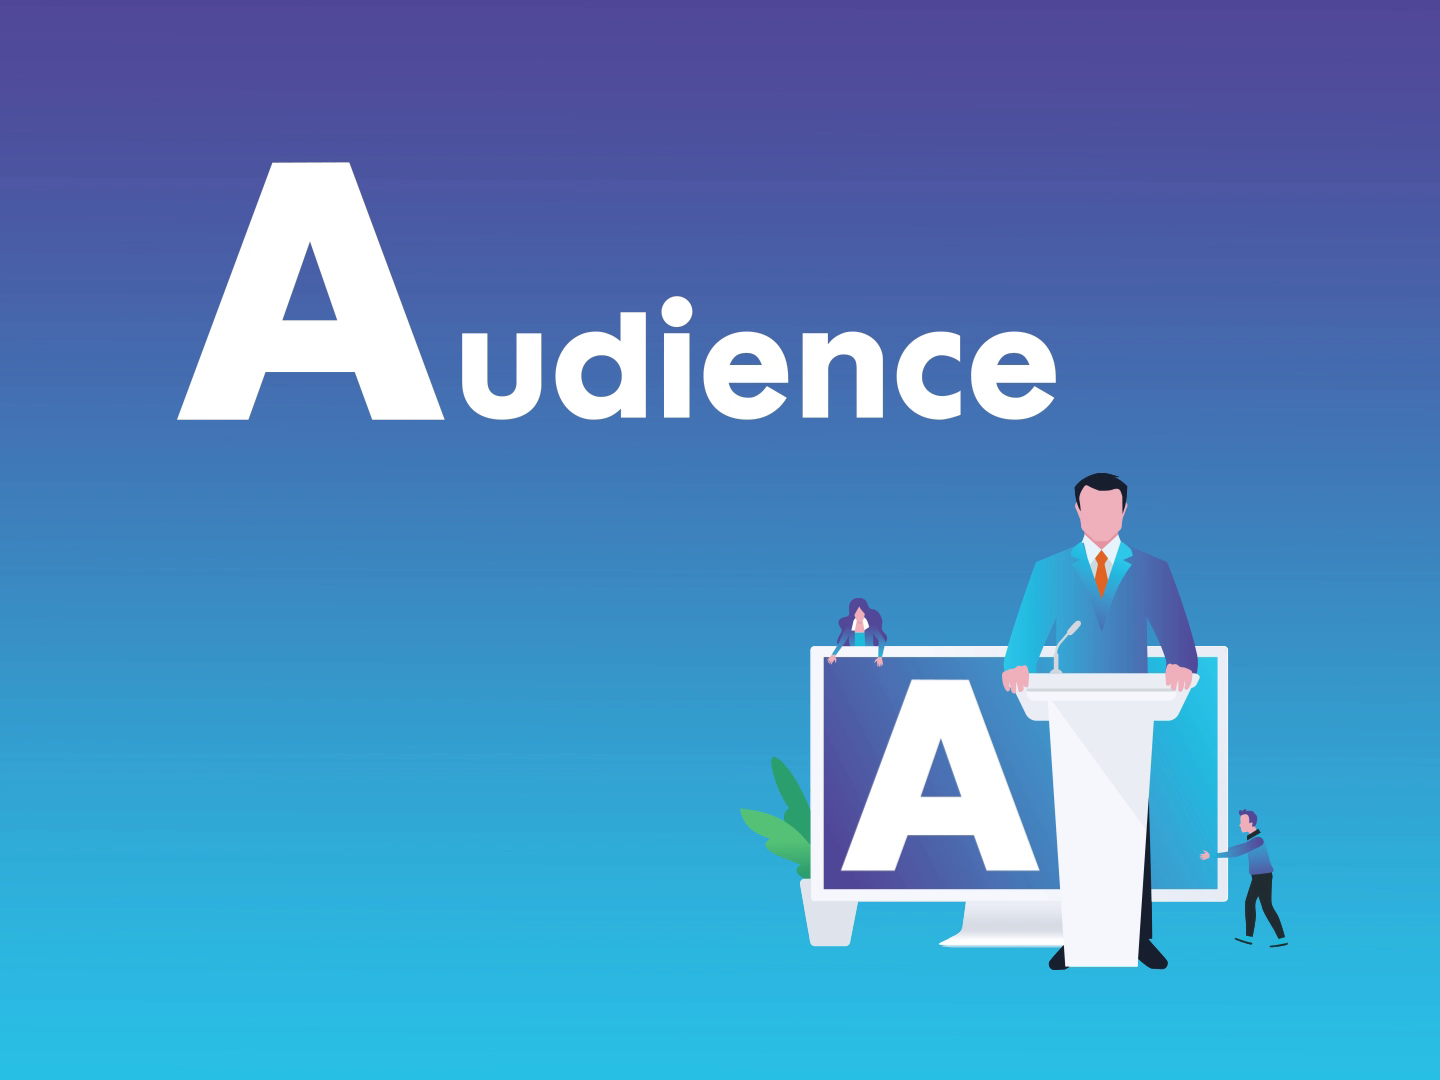 A for Audience